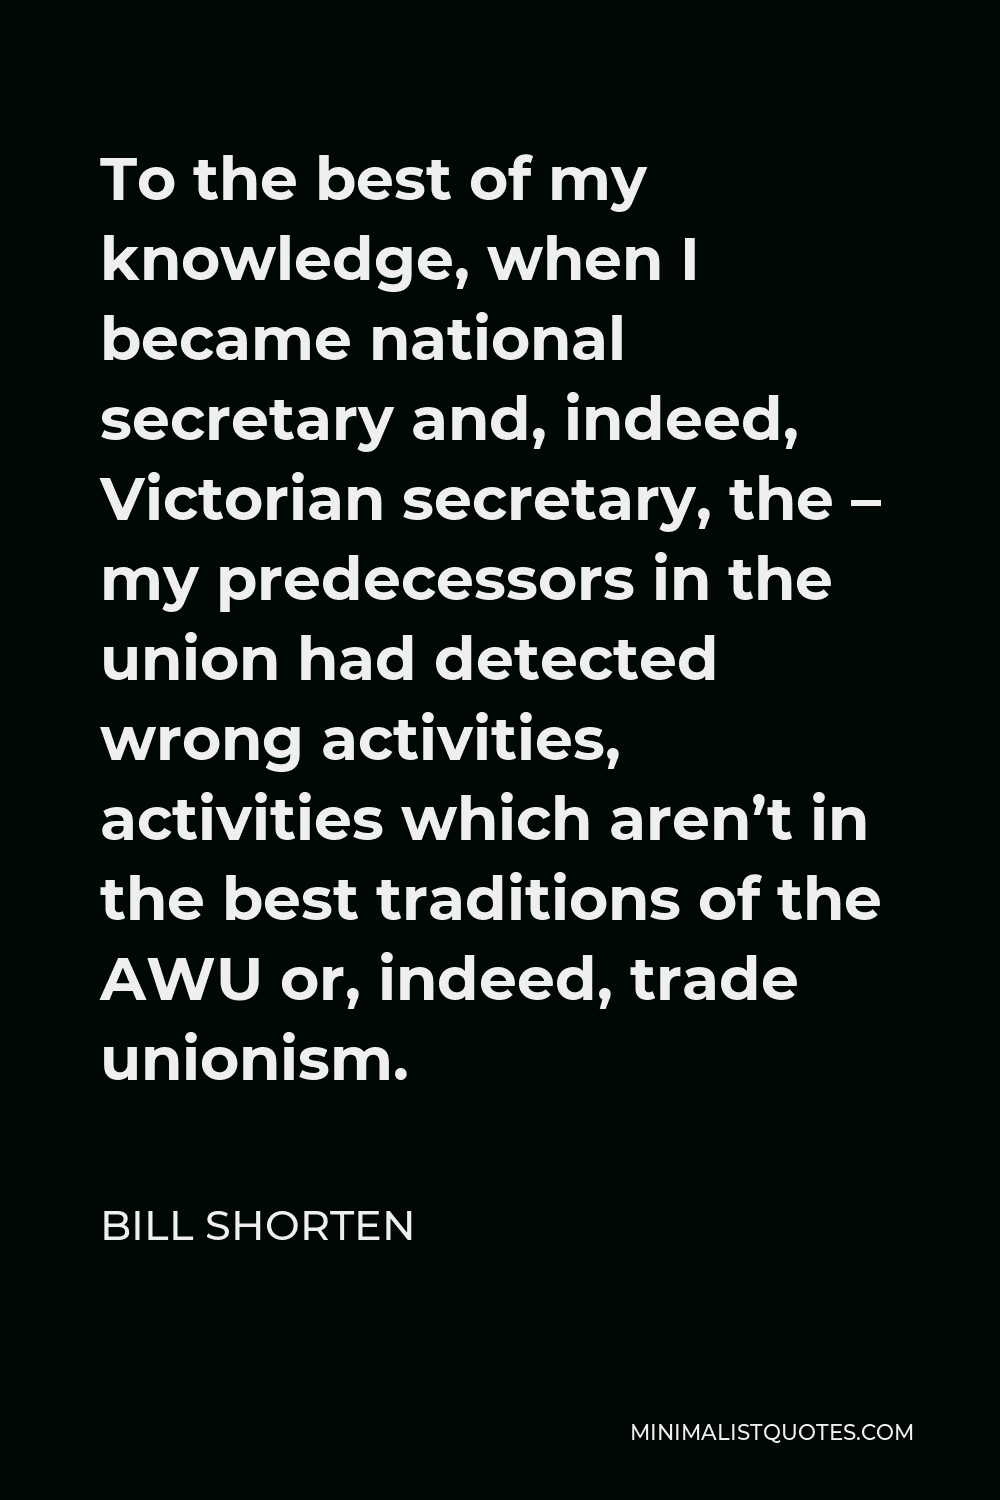 Bill Shorten Quote - To the best of my knowledge, when I became national secretary and, indeed, Victorian secretary, the – my predecessors in the union had detected wrong activities, activities which aren’t in the best traditions of the AWU or, indeed, trade unionism.